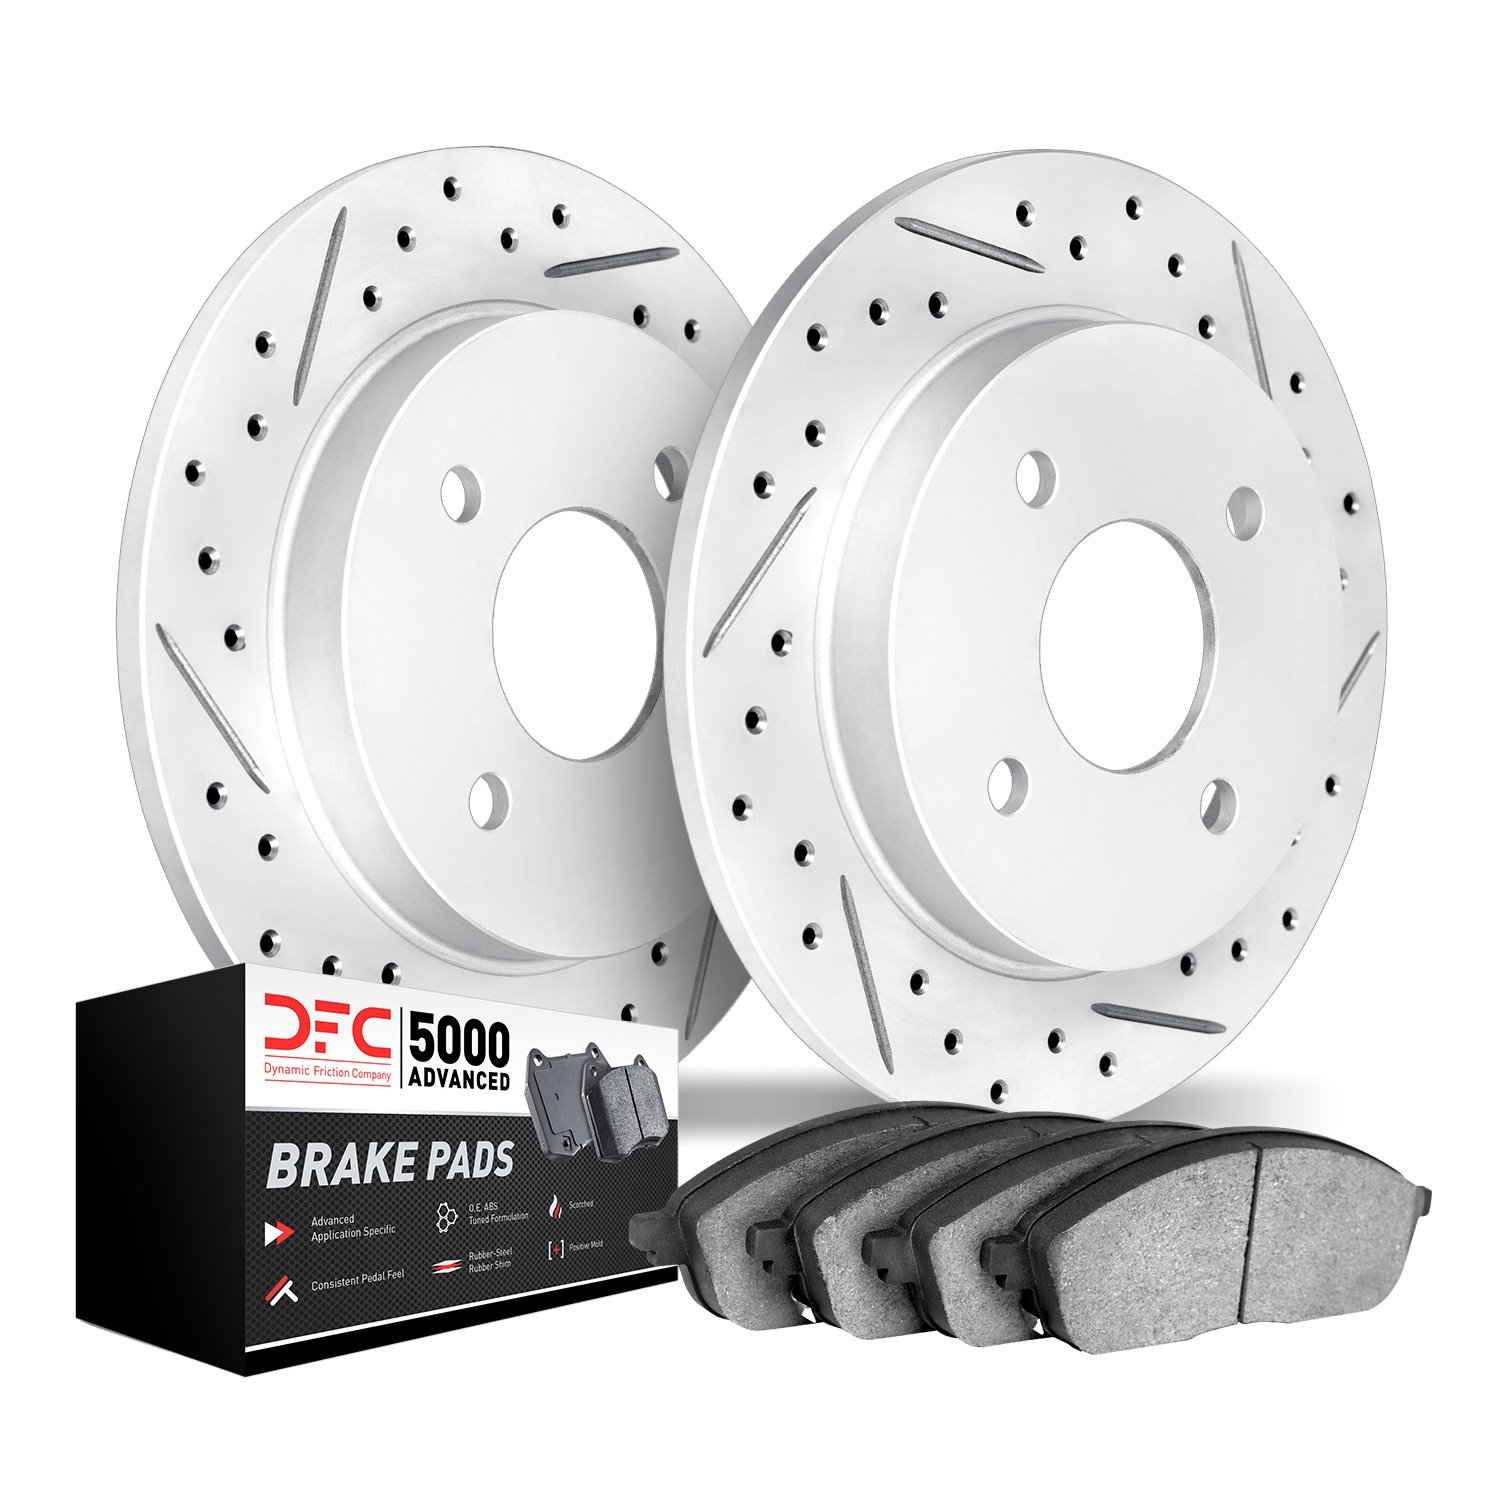 2502-27014 Geoperformance Drilled/Slotted Rotors w/5000 Advanced Brake Pads Kit, 2000-2004 Multiple Makes/Models, Position: Rear